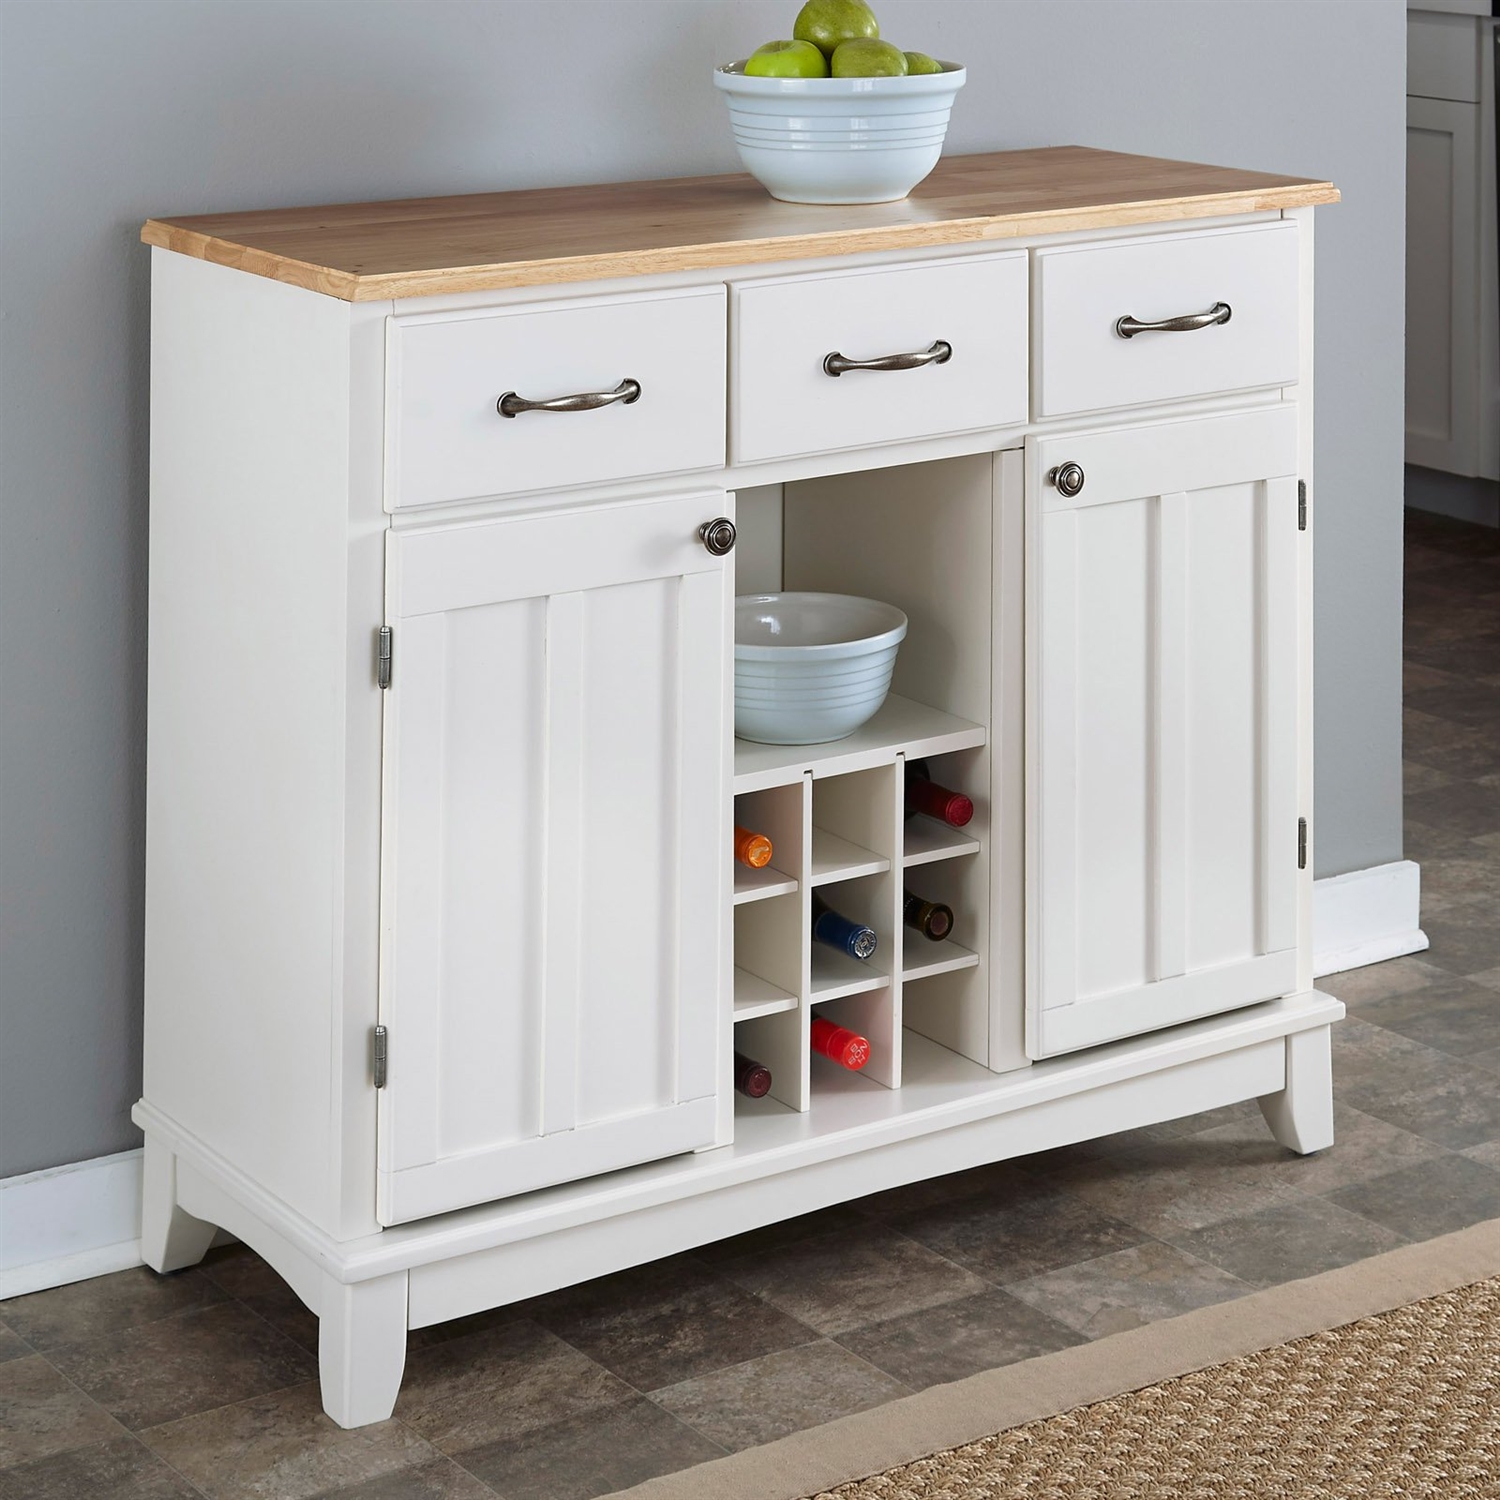 natural wood top kitchen island sideboard cabinet wine rack in white SOQHJPH